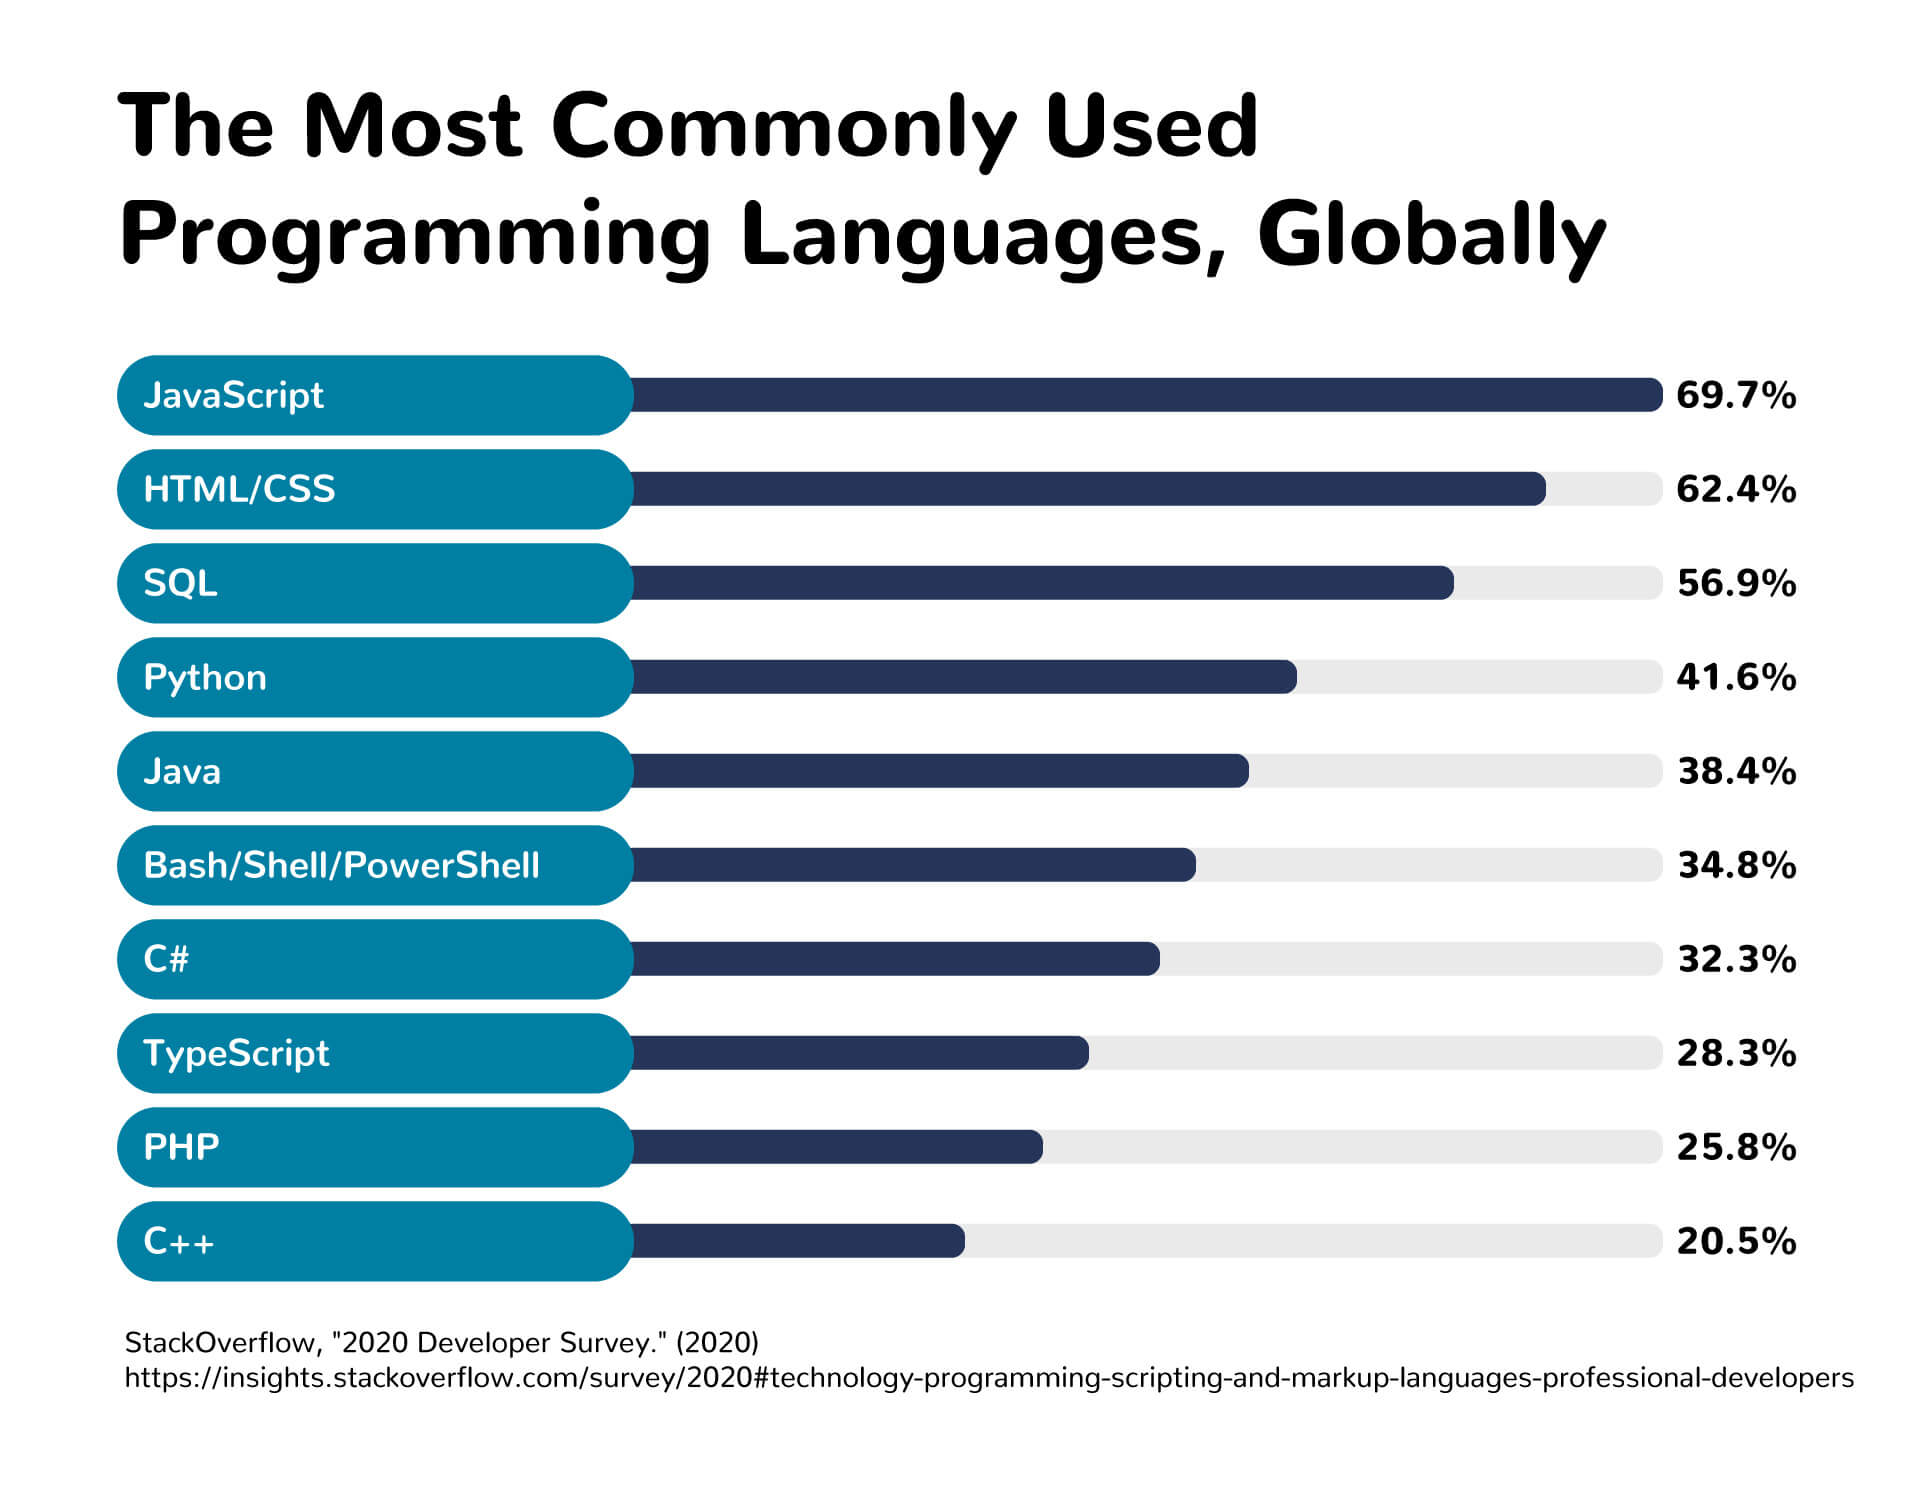 A chart showing the most commonly used programming languages globally